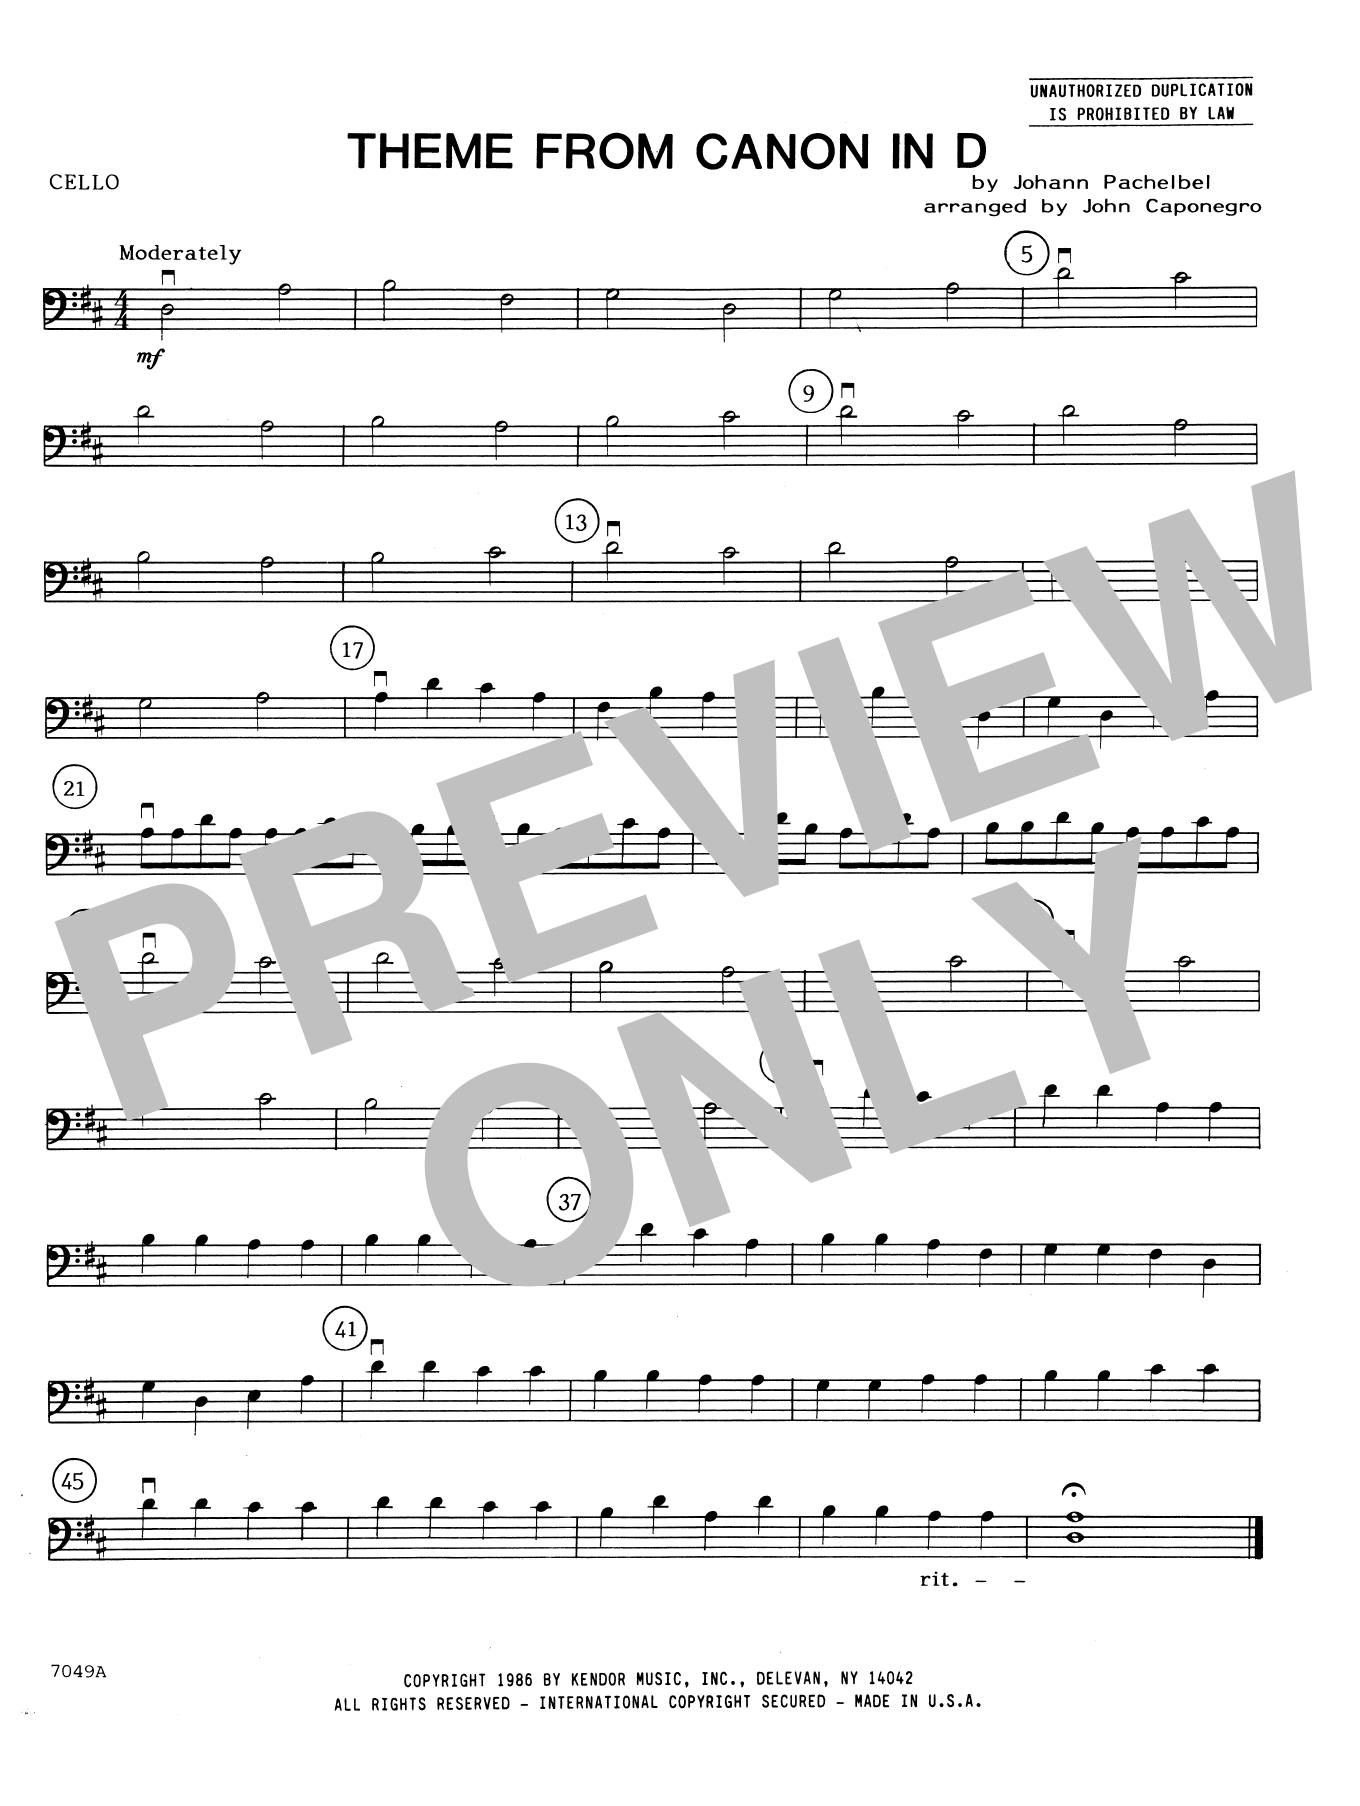 Download John Caponegro Theme From Canon In D - Cello Sheet Music